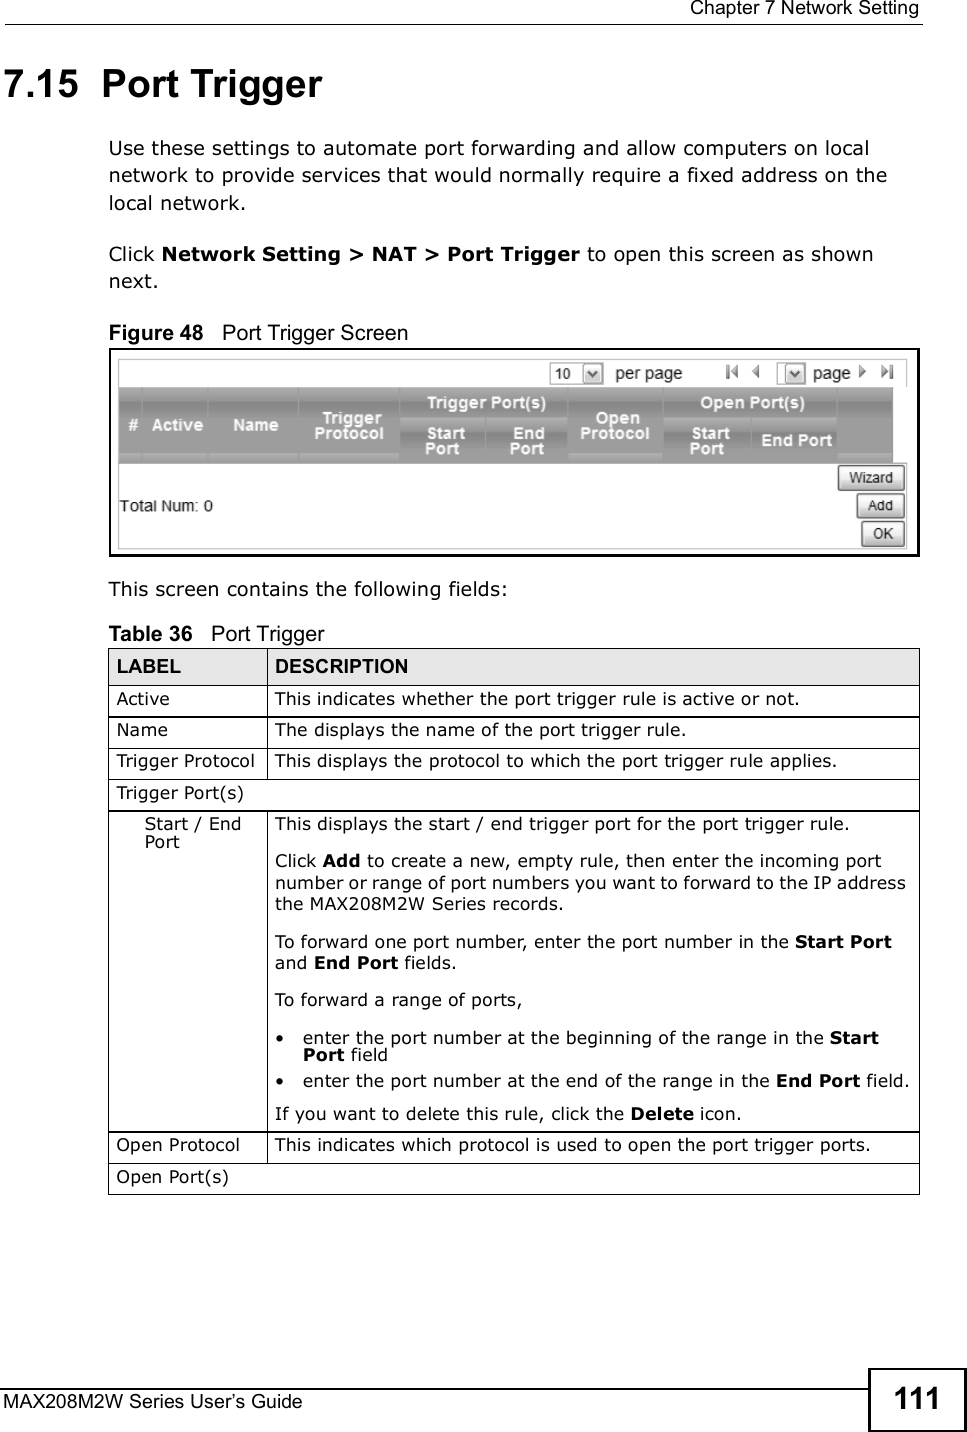  Chapter 7Network SettingMAX208M2W Series User s Guide 1117.15  Port TriggerUse these settings to automate port forwarding and allow computers on local network to provide services that would normally require a fixed address on the local network.Click Network Setting &gt; NAT &gt; Port Trigger to open this screen as shown next.Figure 48   Port Trigger ScreenThis screen contains the following fields:Table 36   Port TriggerLABEL DESCRIPTIONActiveThis indicates whether the port trigger rule is active or not.NameThe displays the name of the port trigger rule.Trigger ProtocolThis displays the protocol to which the port trigger rule applies.Trigger Port(s)Start / End PortThis displays the start / end trigger port for the port trigger rule.Click Add to create a new, empty rule, then enter the incoming port number or range of port numbers you want to forward to the IP address the MAX208M2W Series records.To forward one port number, enter the port number in the Start Port and End Port fields.To forward a range of ports,!enter the port number at the beginning of the range in the Start Port field!enter the port number at the end of the range in the End Port field.If you want to delete this rule, click the Delete icon.Open ProtocolThis indicates which protocol is used to open the port trigger ports.Open Port(s)